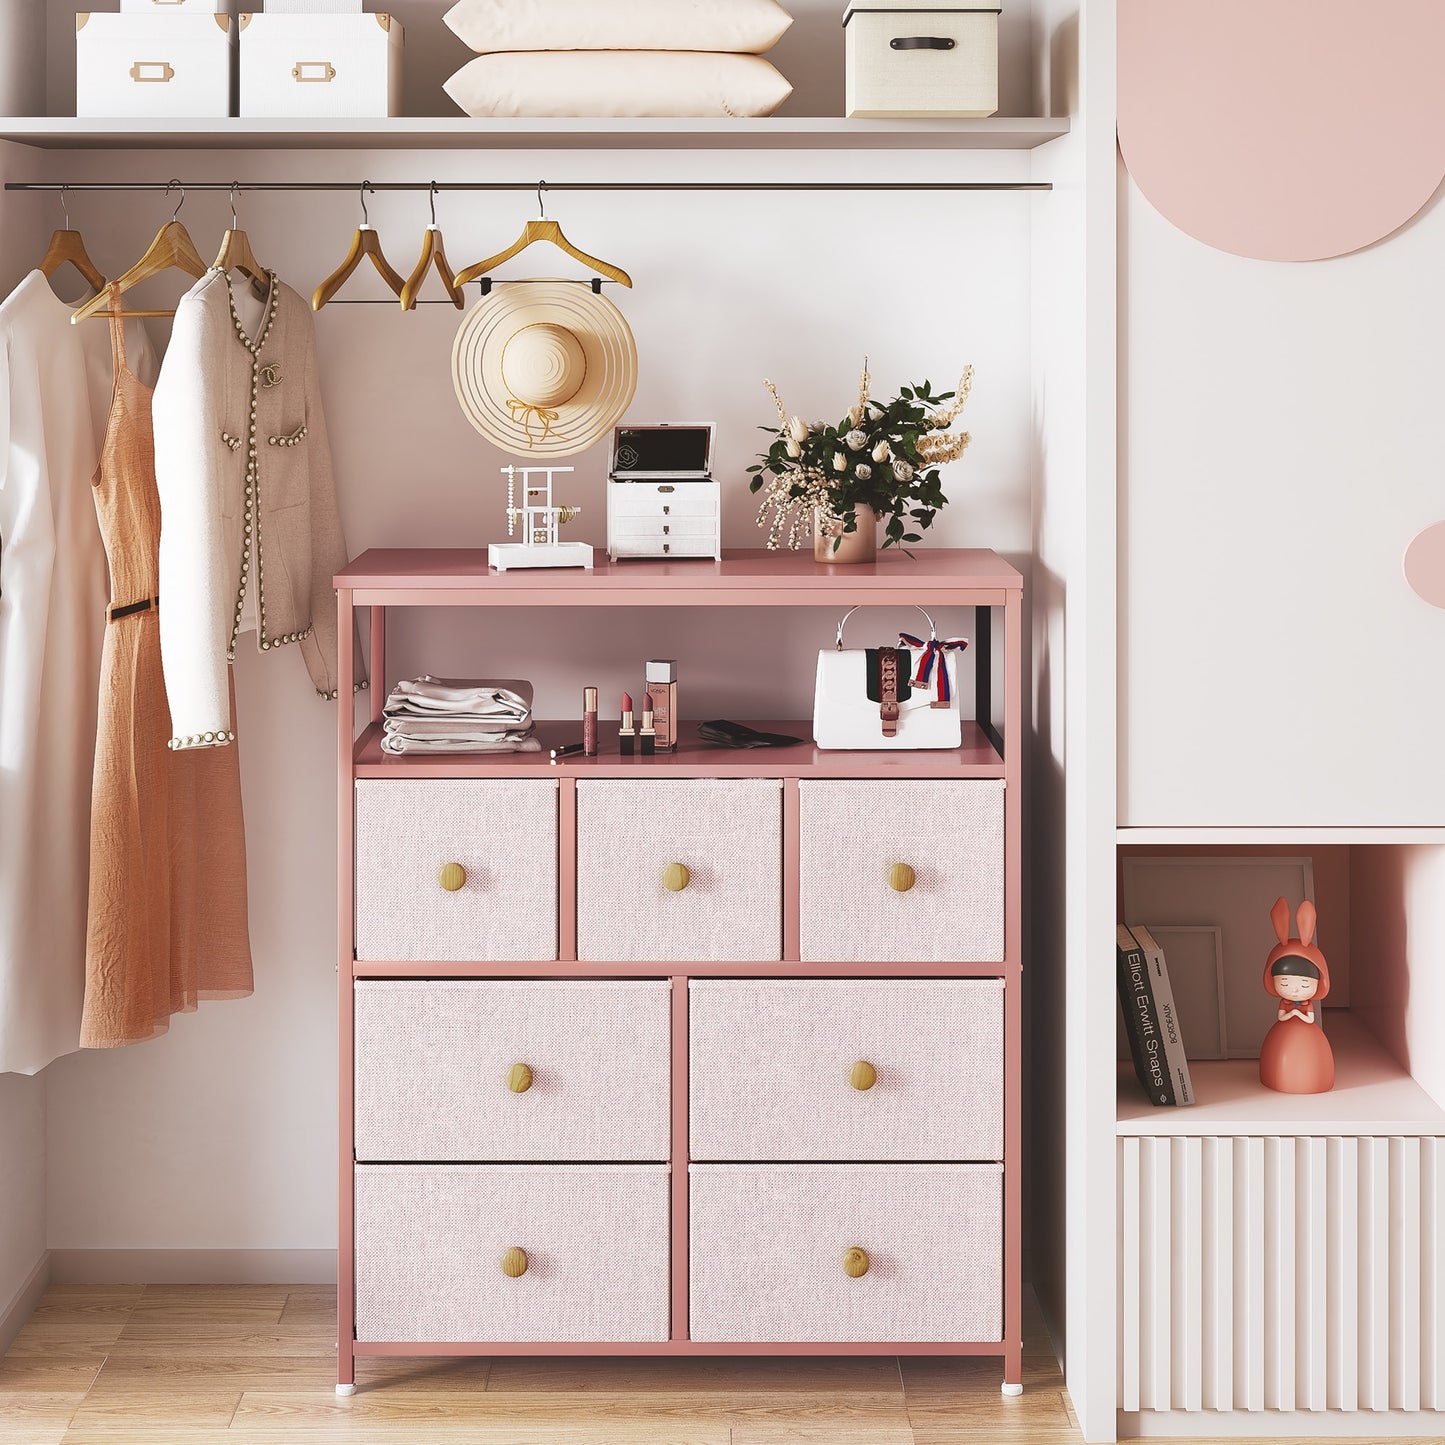 EnHomee Pink Dressers for Bedroom 7 Drawers for Clothes Girls Dresser with Wooden Shelves Anti-tipping Bedroom Closets Furniture